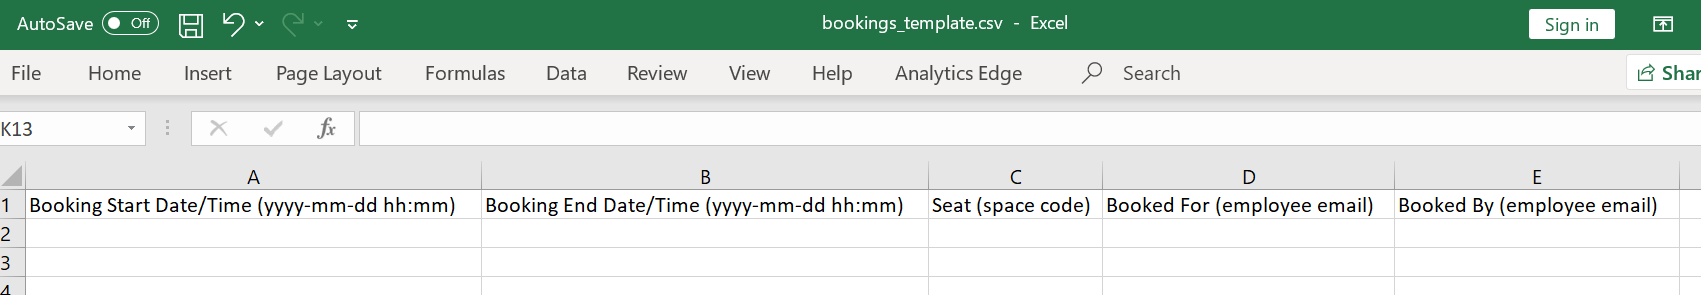 booking_template.png